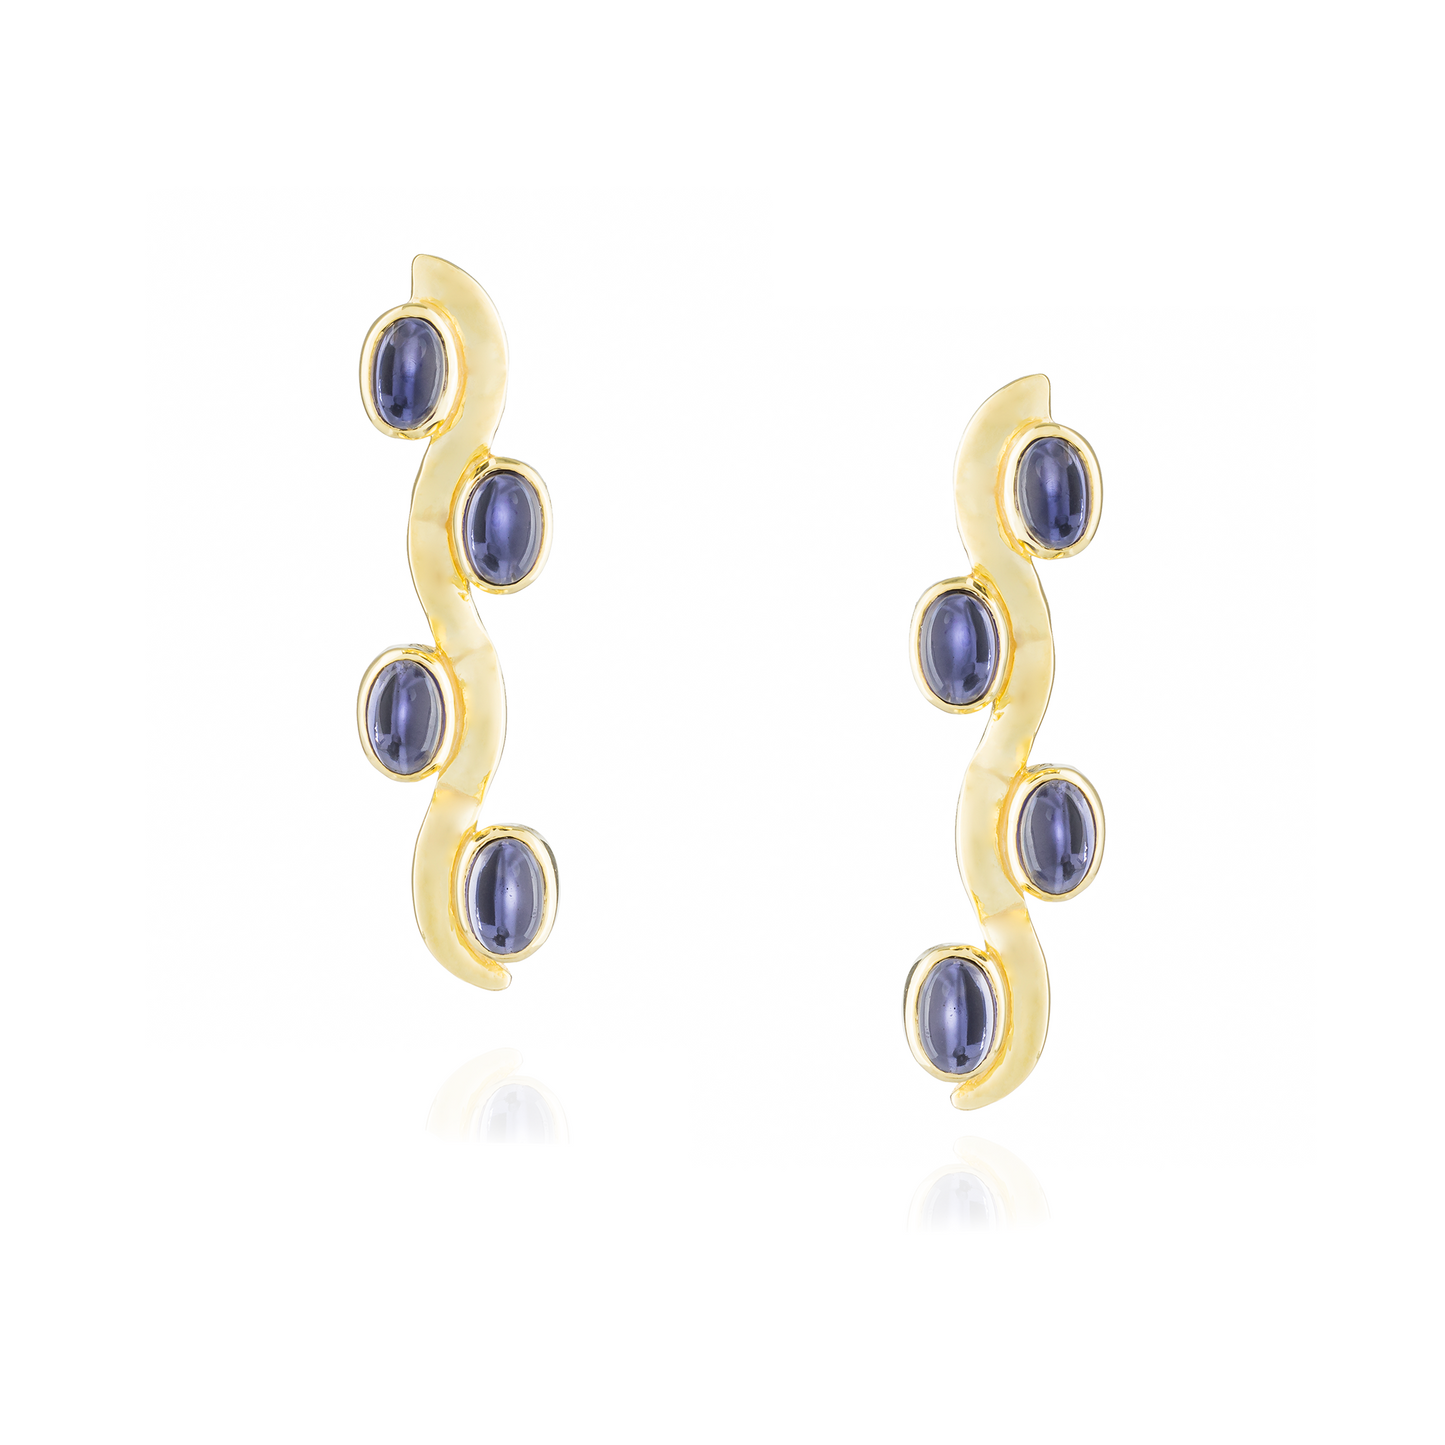 Caramelo 925 Silver Earrings plated in 18k Yellow Gold with Iolite Cabouchon